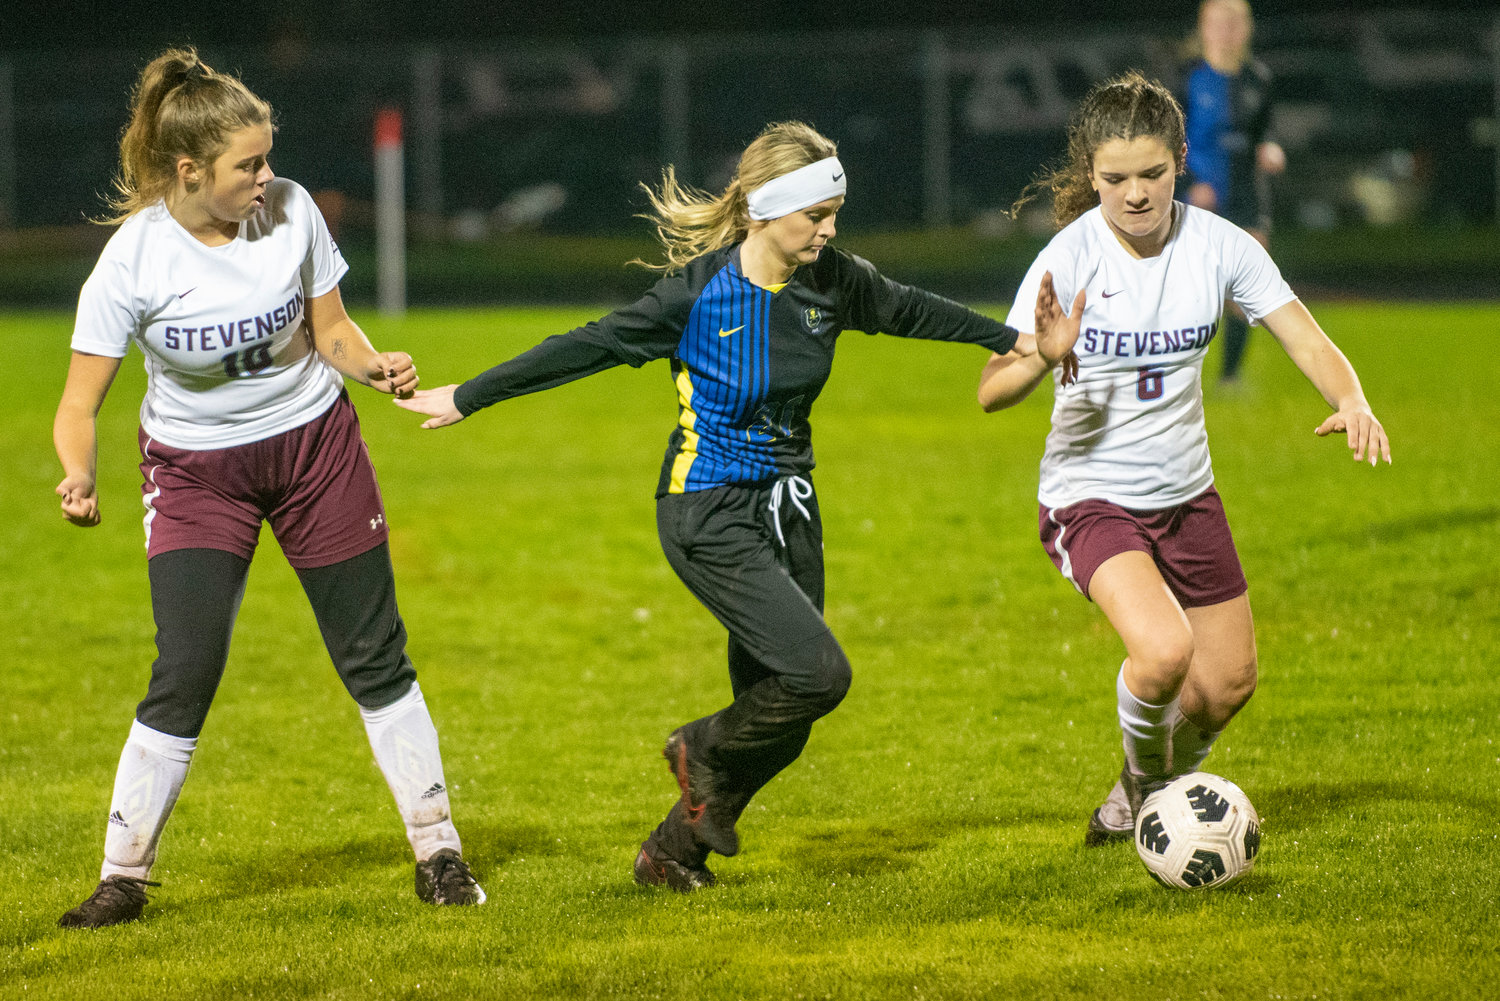 Adna's Natalee Werner (21) fights off two Stevenson players in the district playoffs at home Nov. 1.